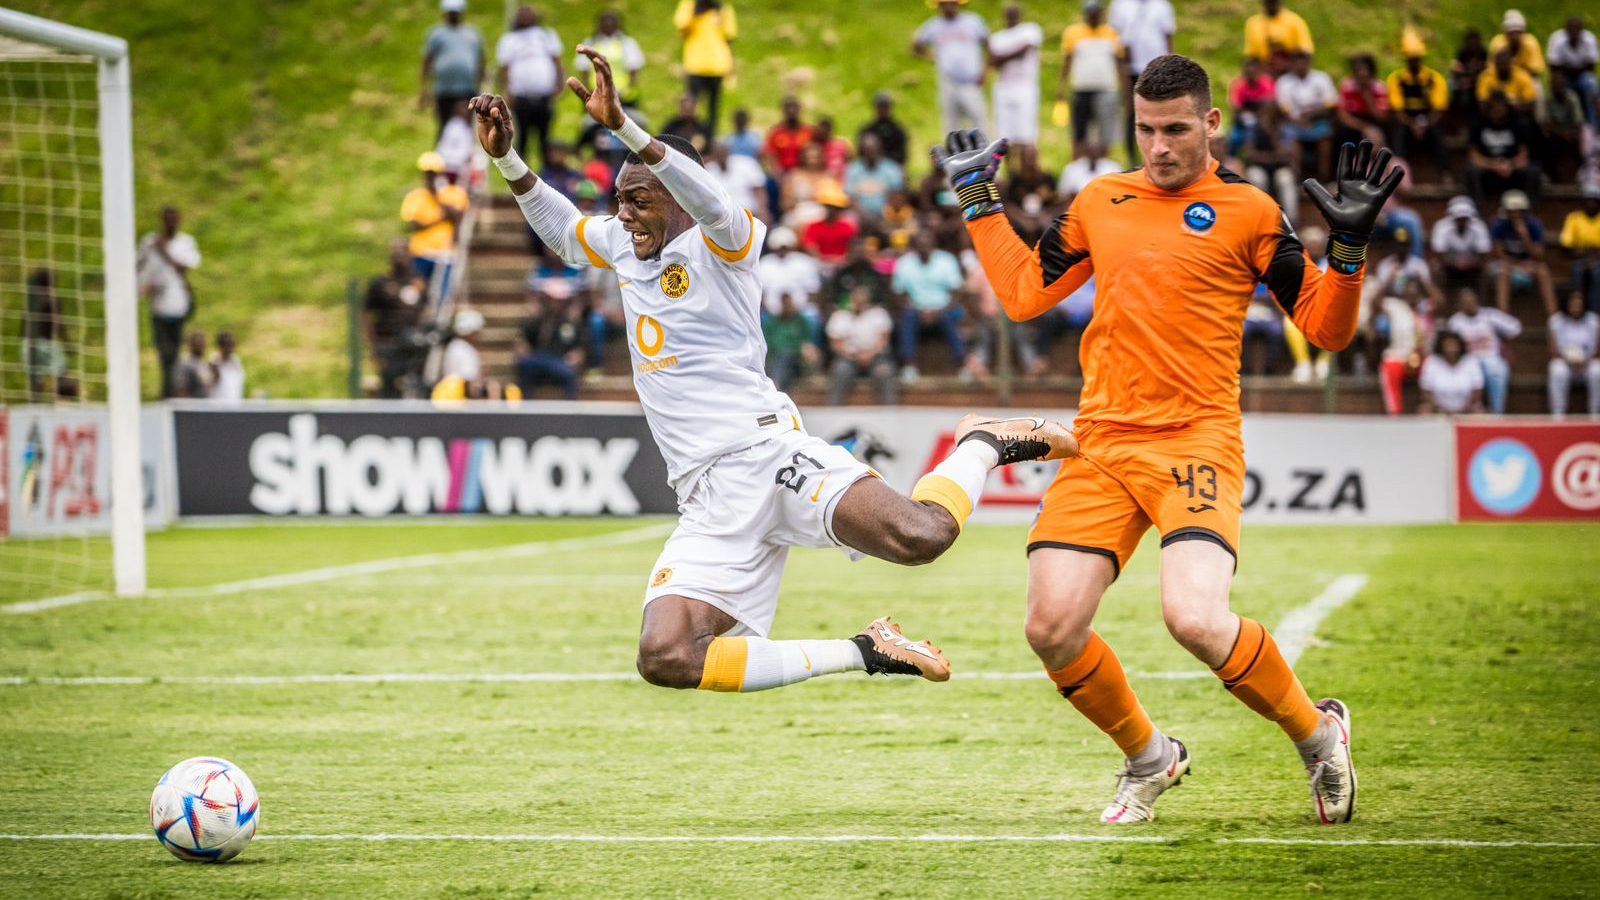 Christian Saile during the tie against Richards Bay